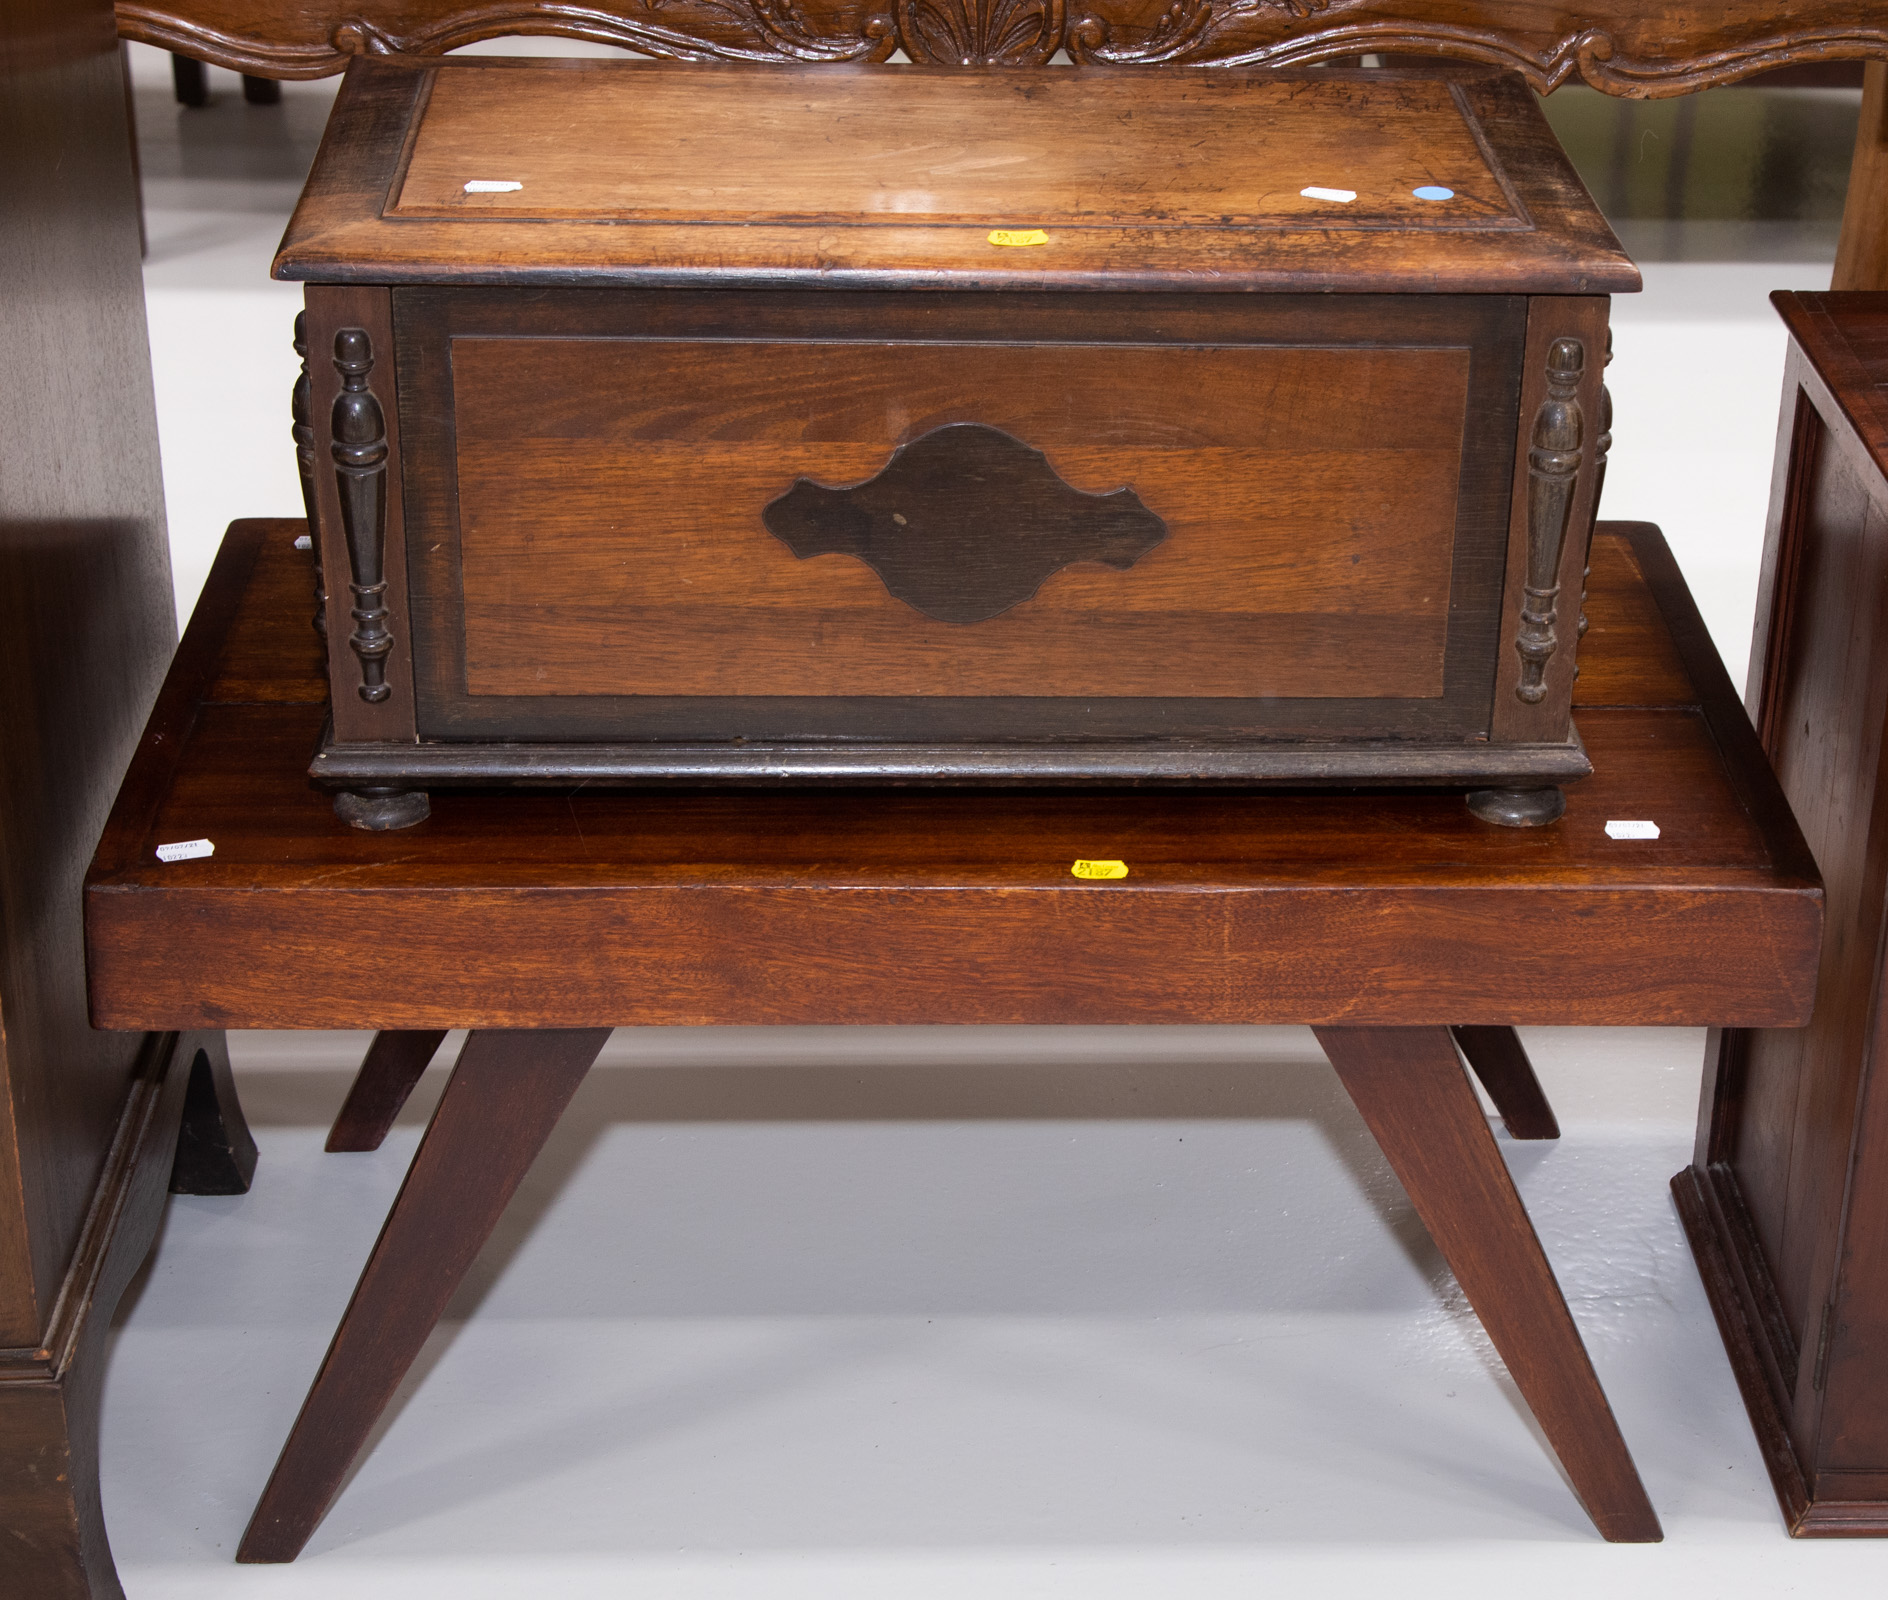 A LOW TABLE WOODEN CHEST Chest 335130